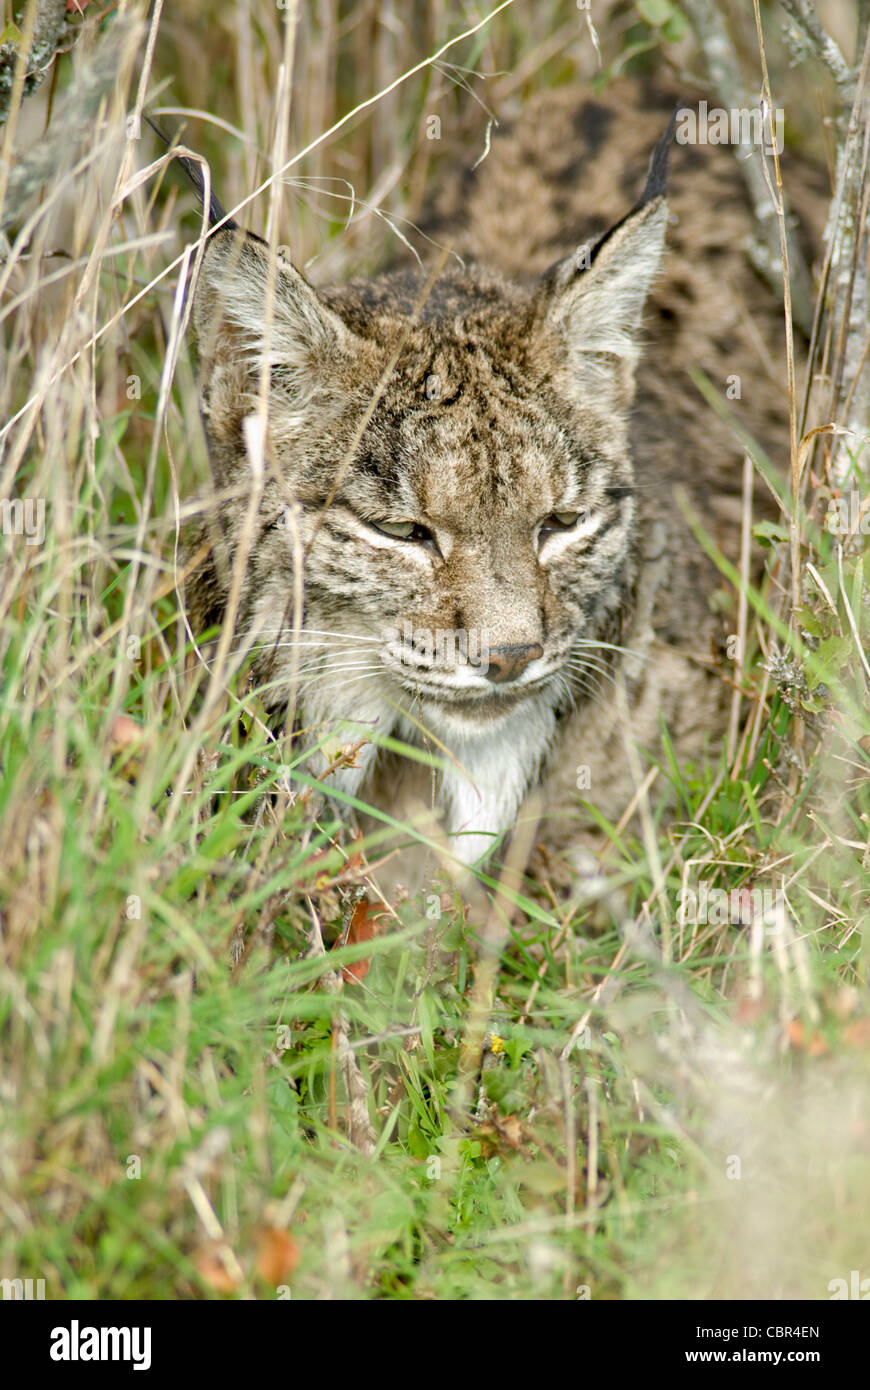 Wild Lynx ibérique standing in tall grass Banque D'Images